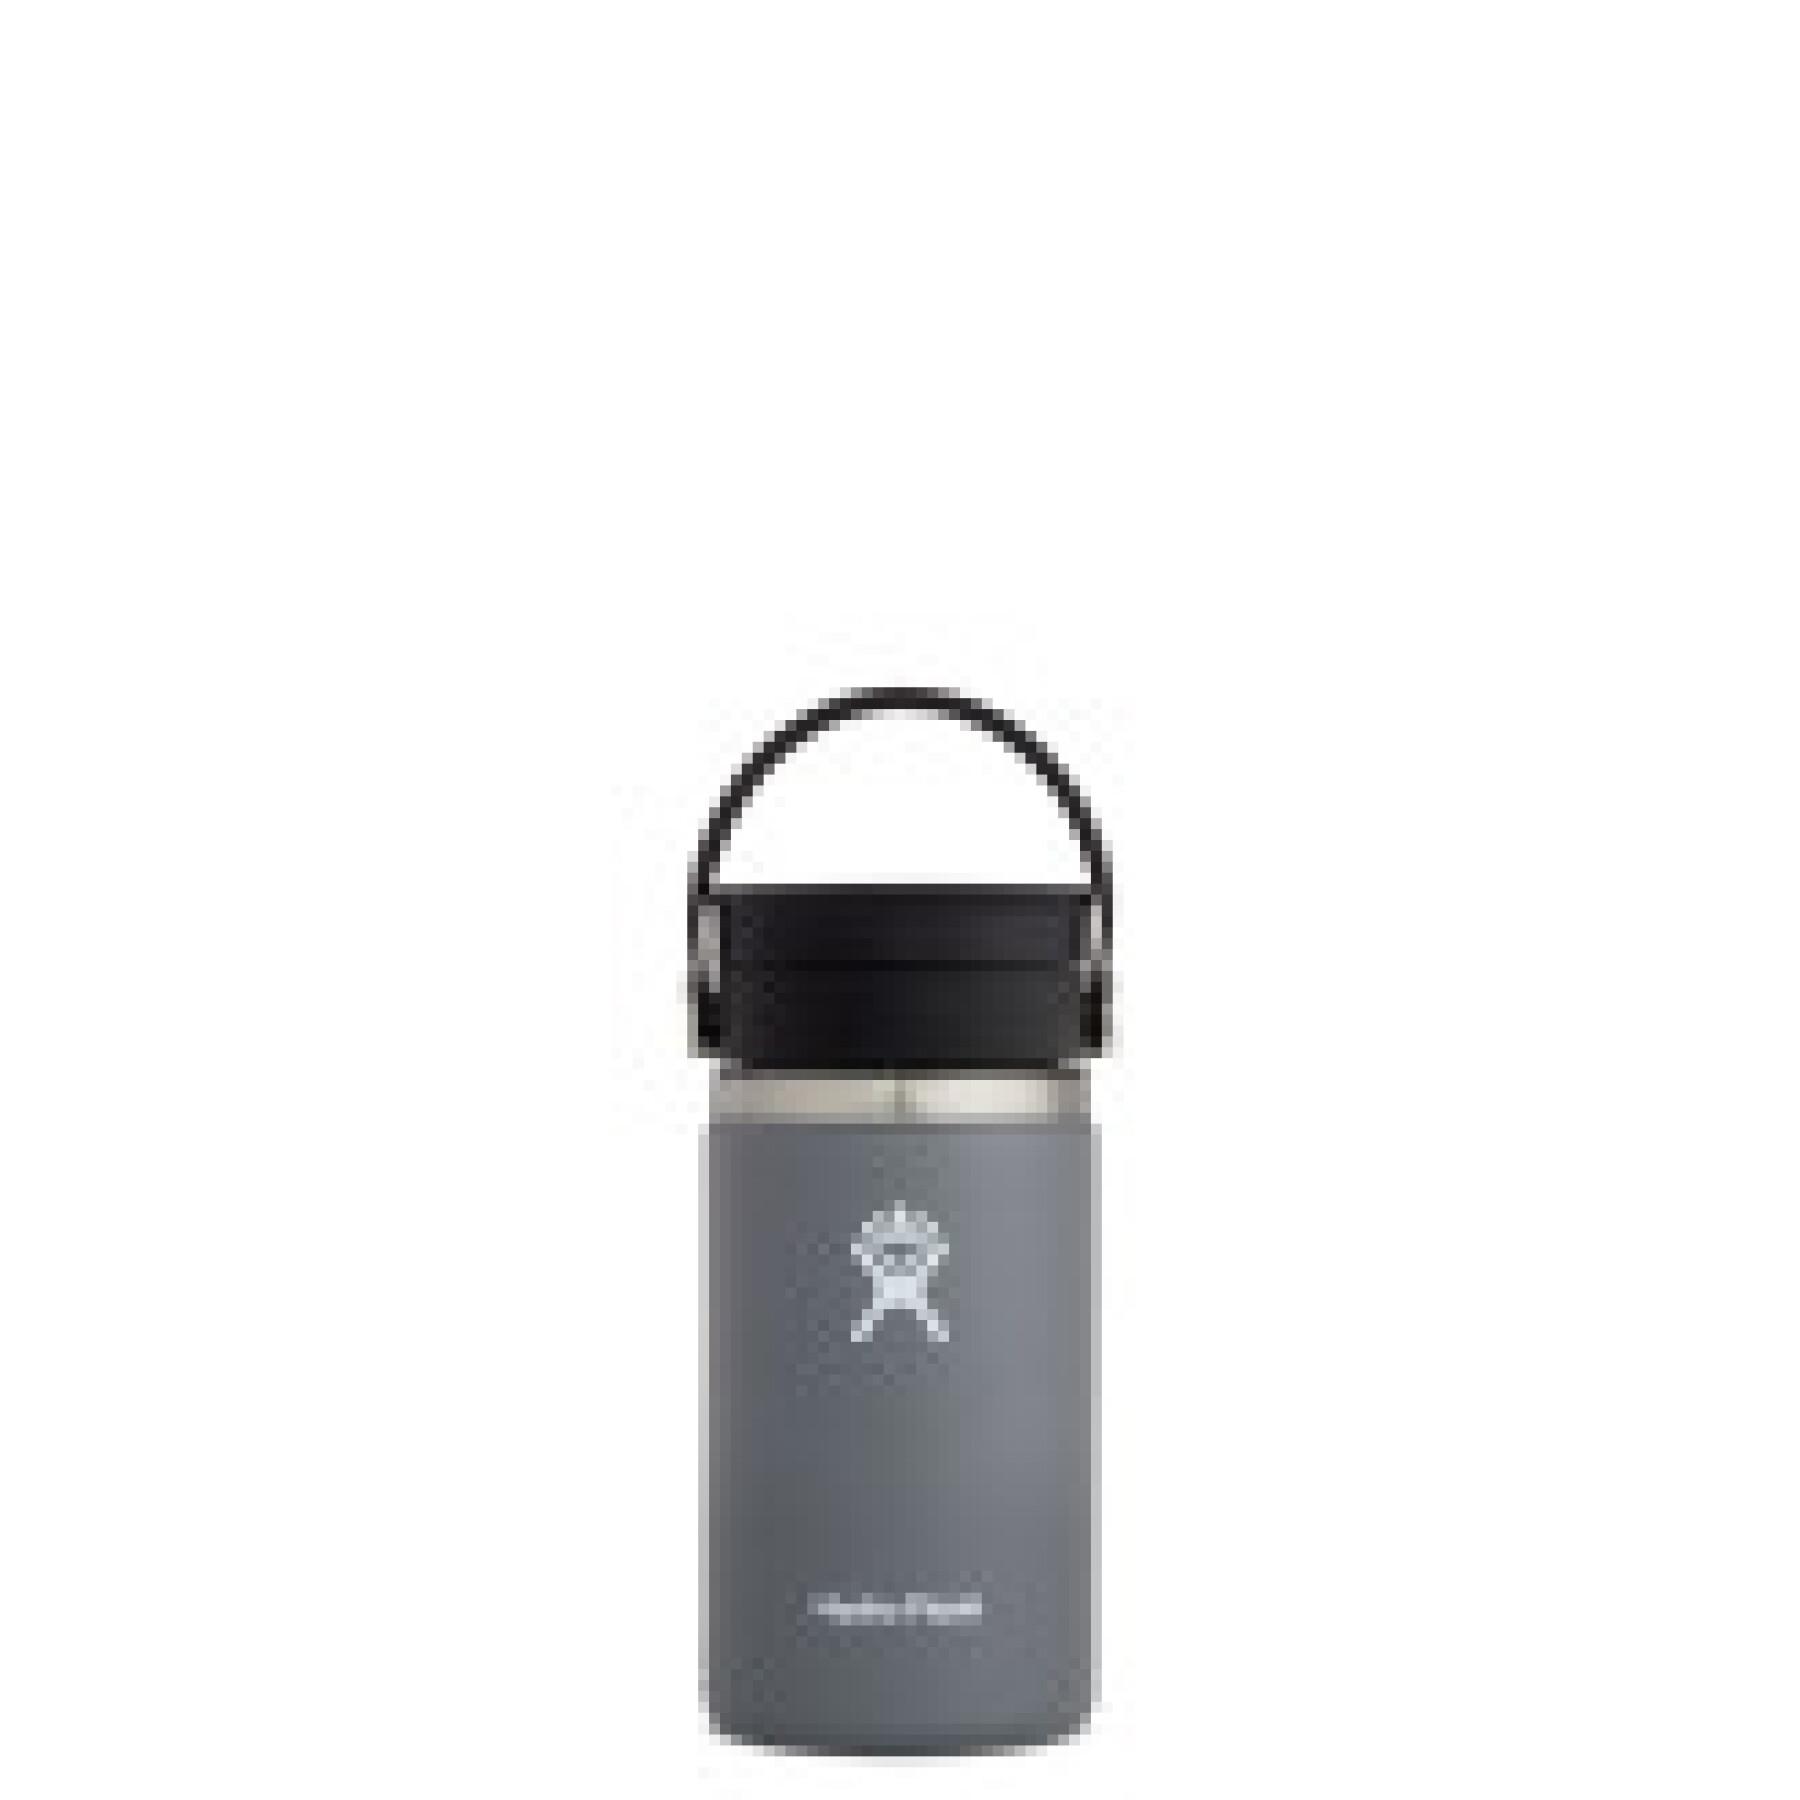 Tapa Hydro Flask wide moouth with flex sip lid 12 oz